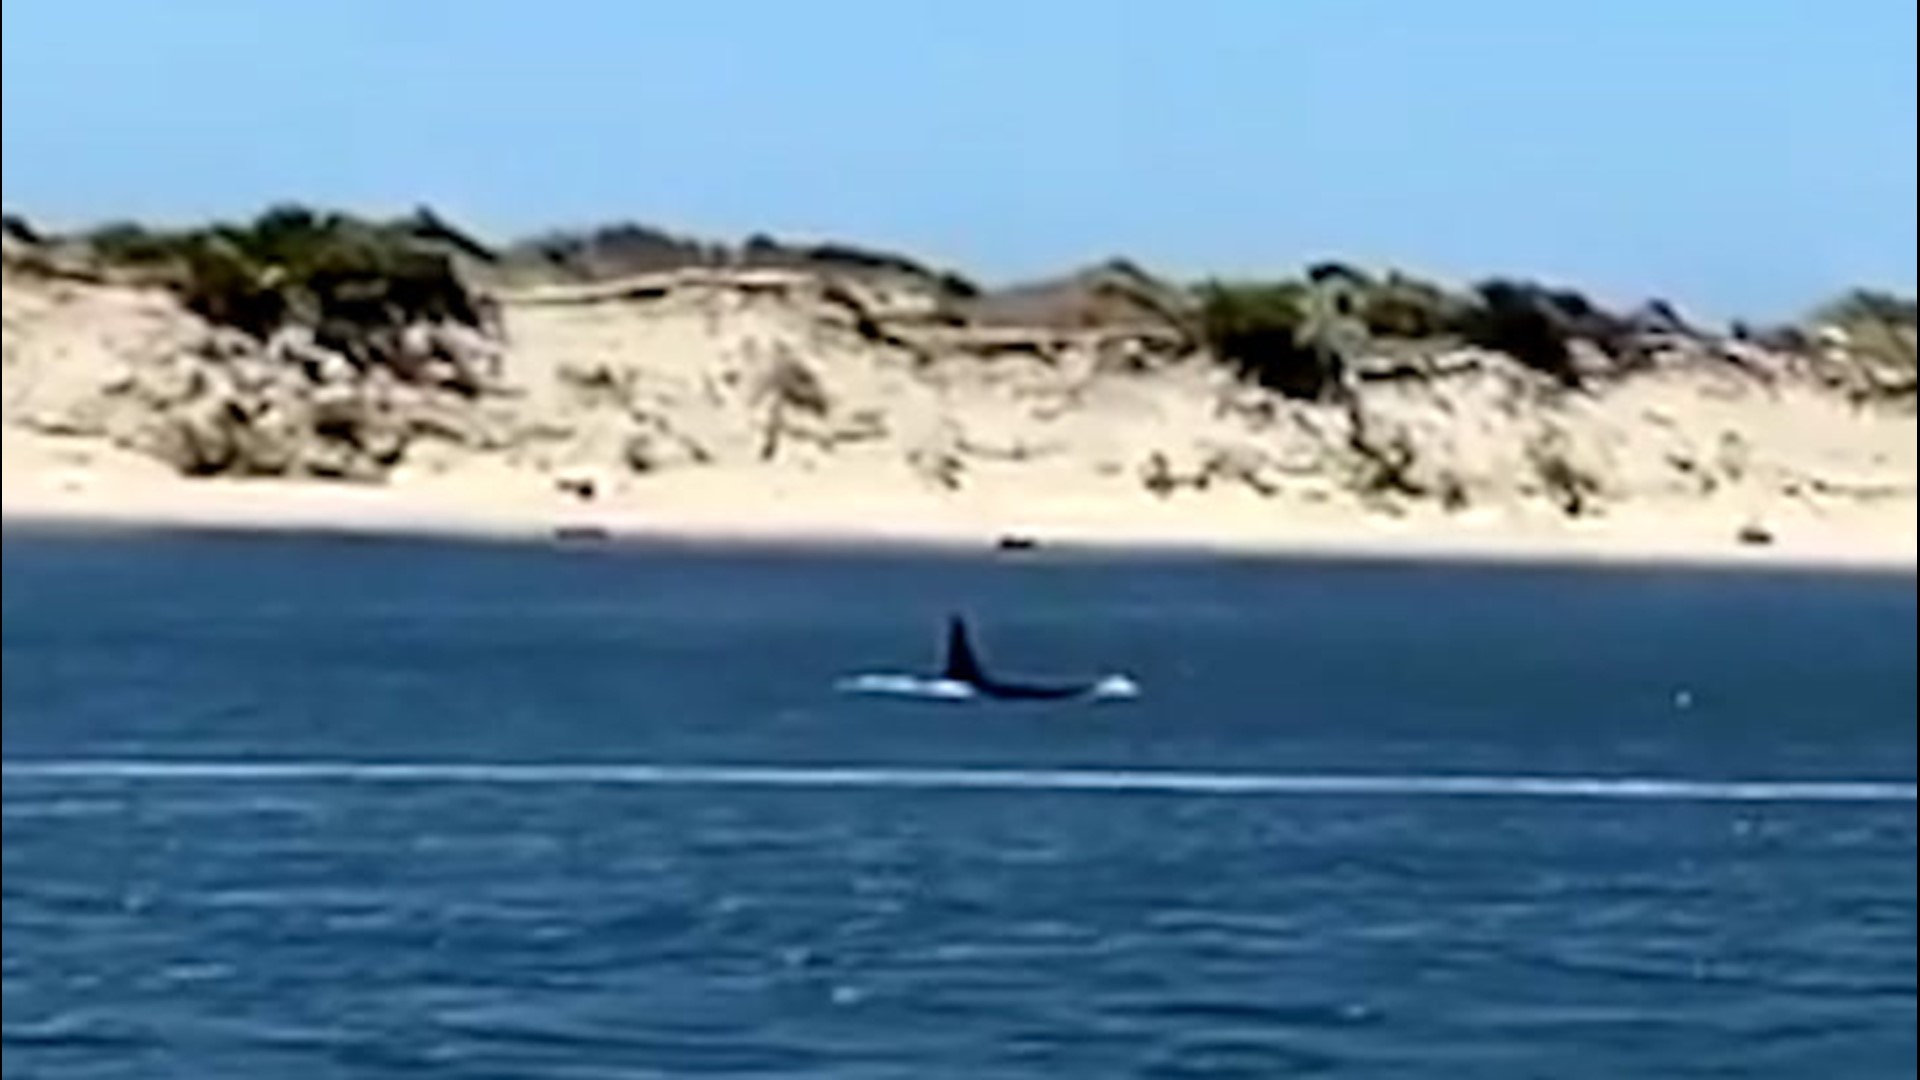 Beachgoers got more than just a relaxing day at the beach in Florence, Oregon. They also were able to watch orca whales swimming near the shore on May 28.